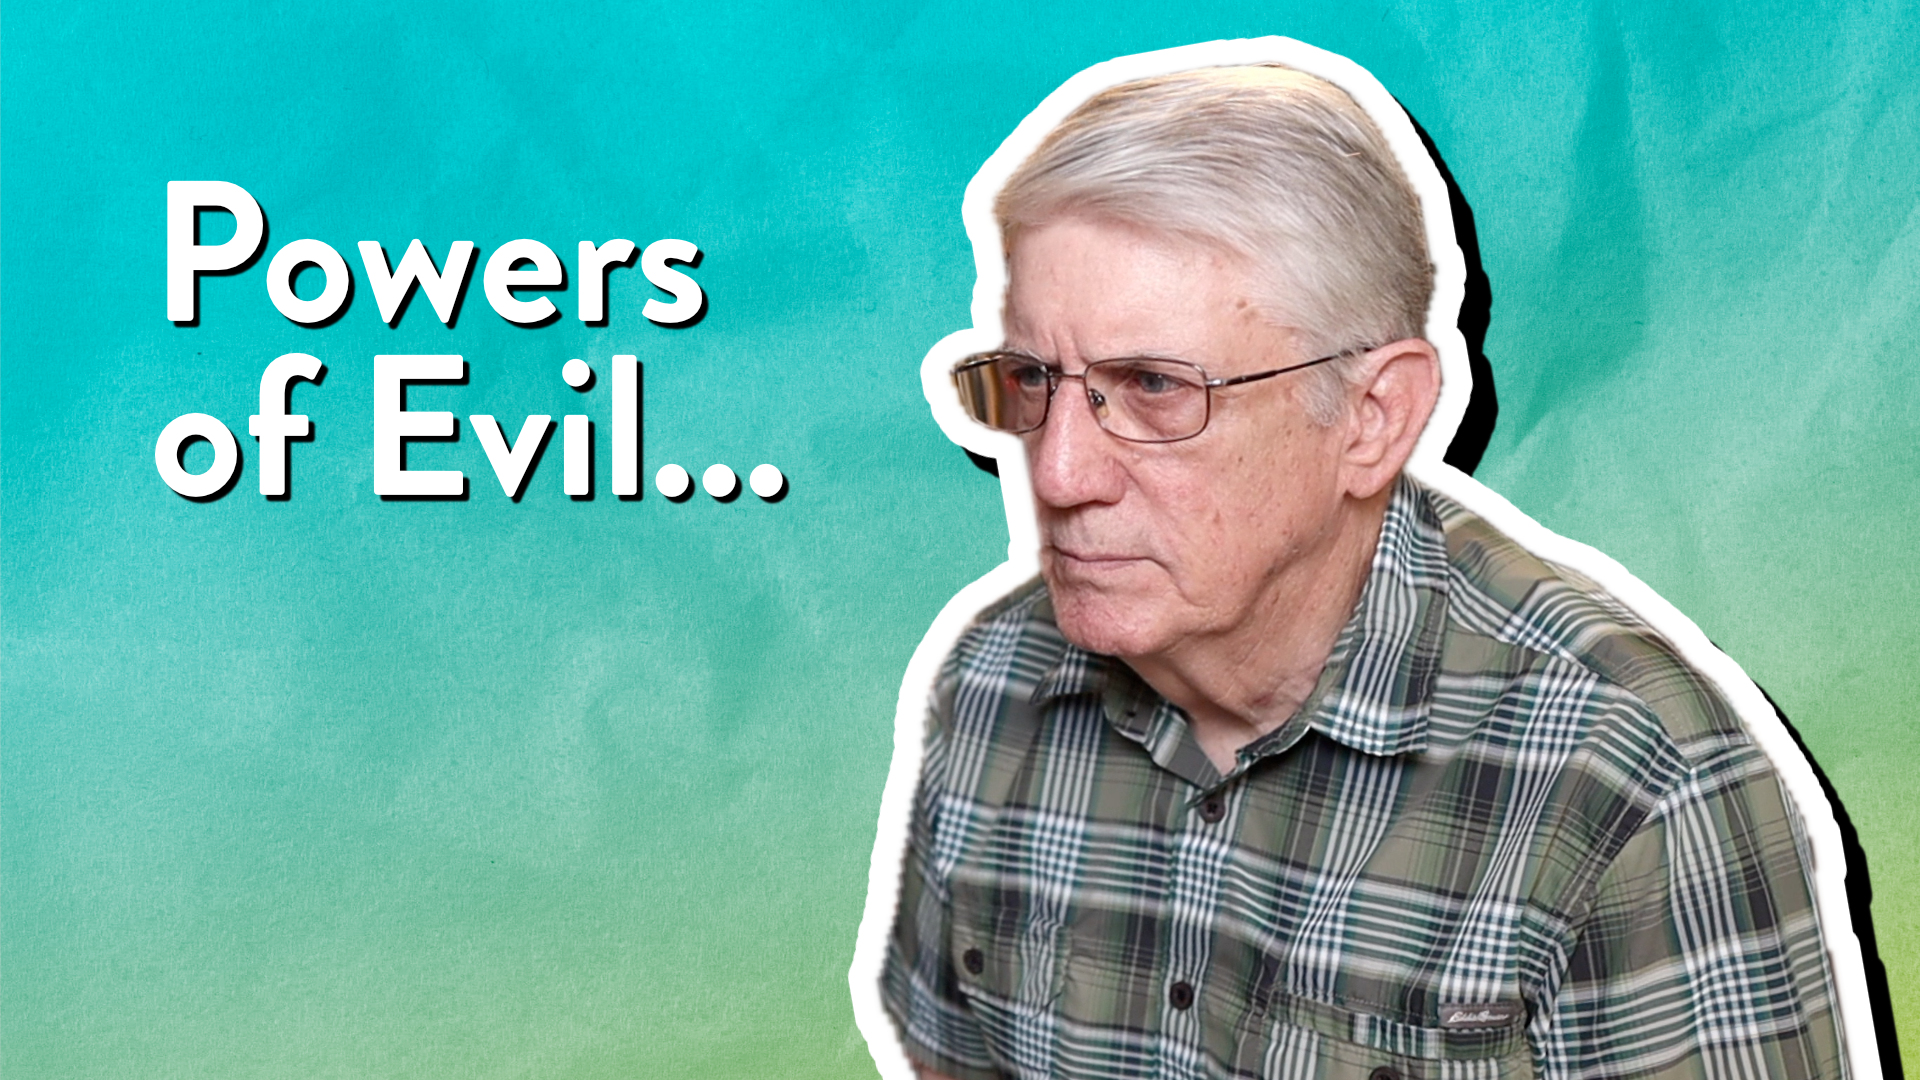 Thoughts on the extraordinary powers of evil